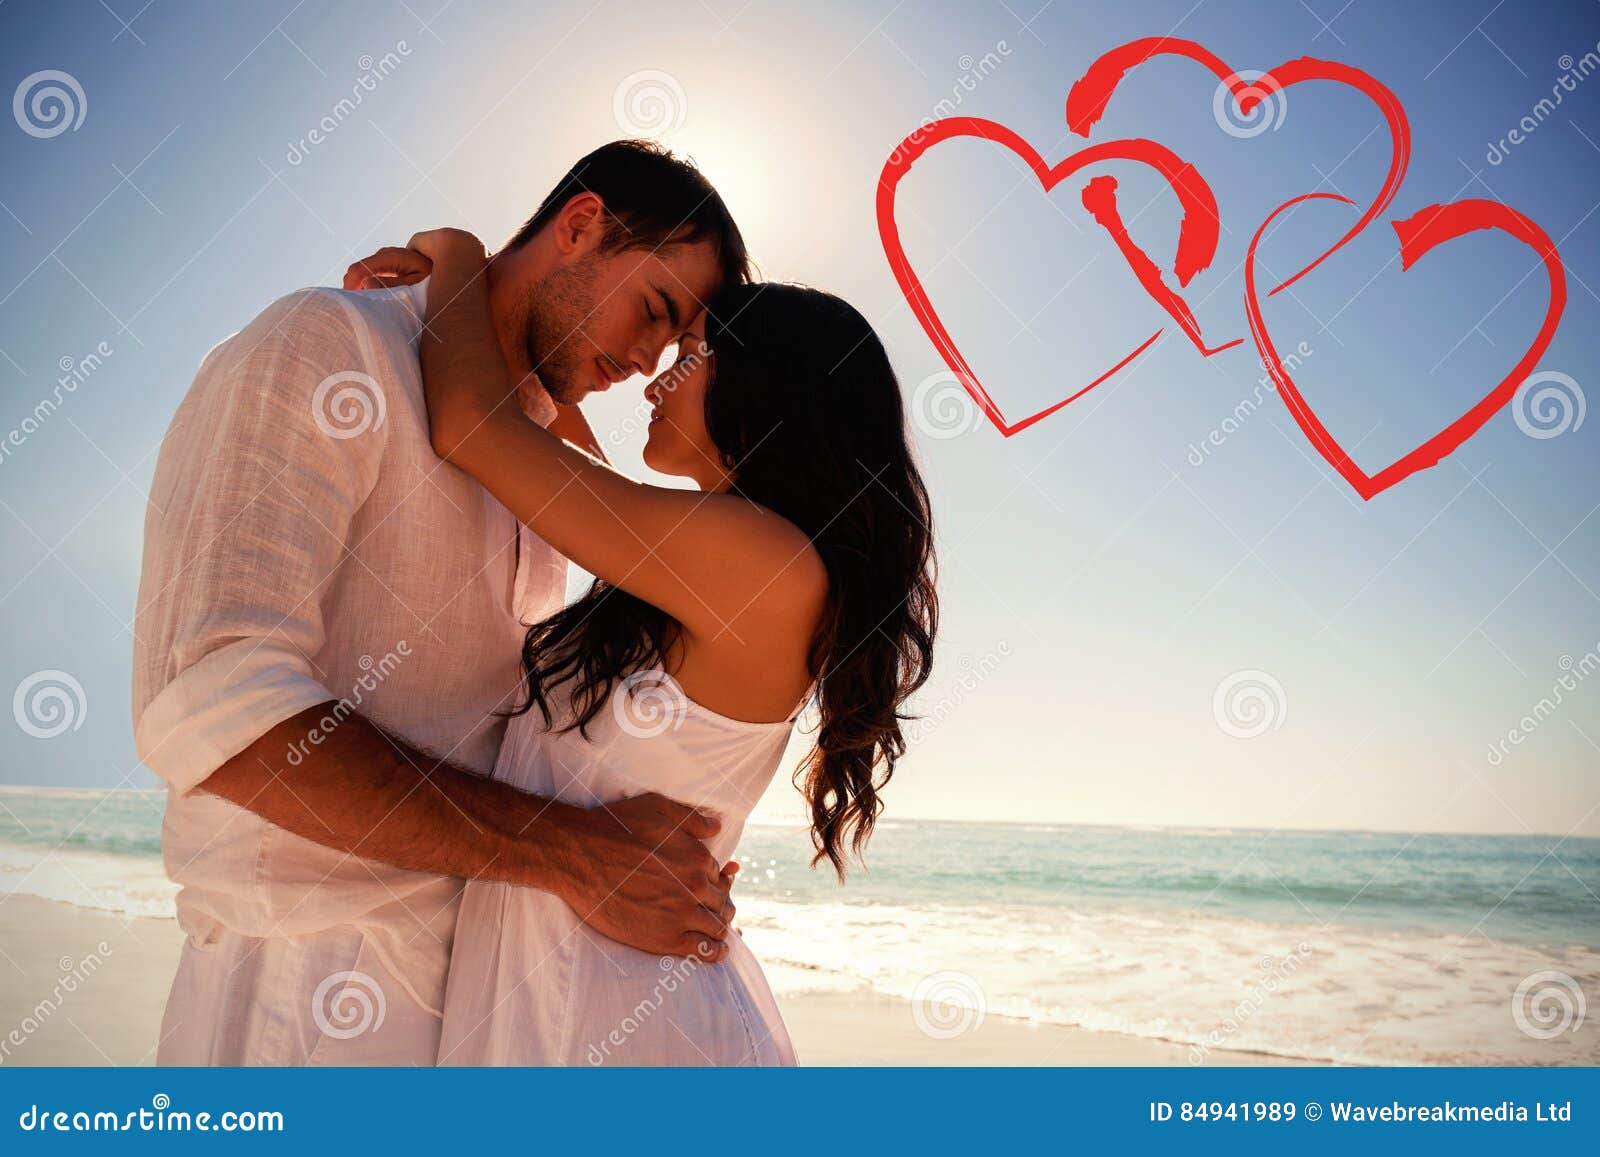 Composite Image of Romantic Couple Embracing Stock Image - Image ...